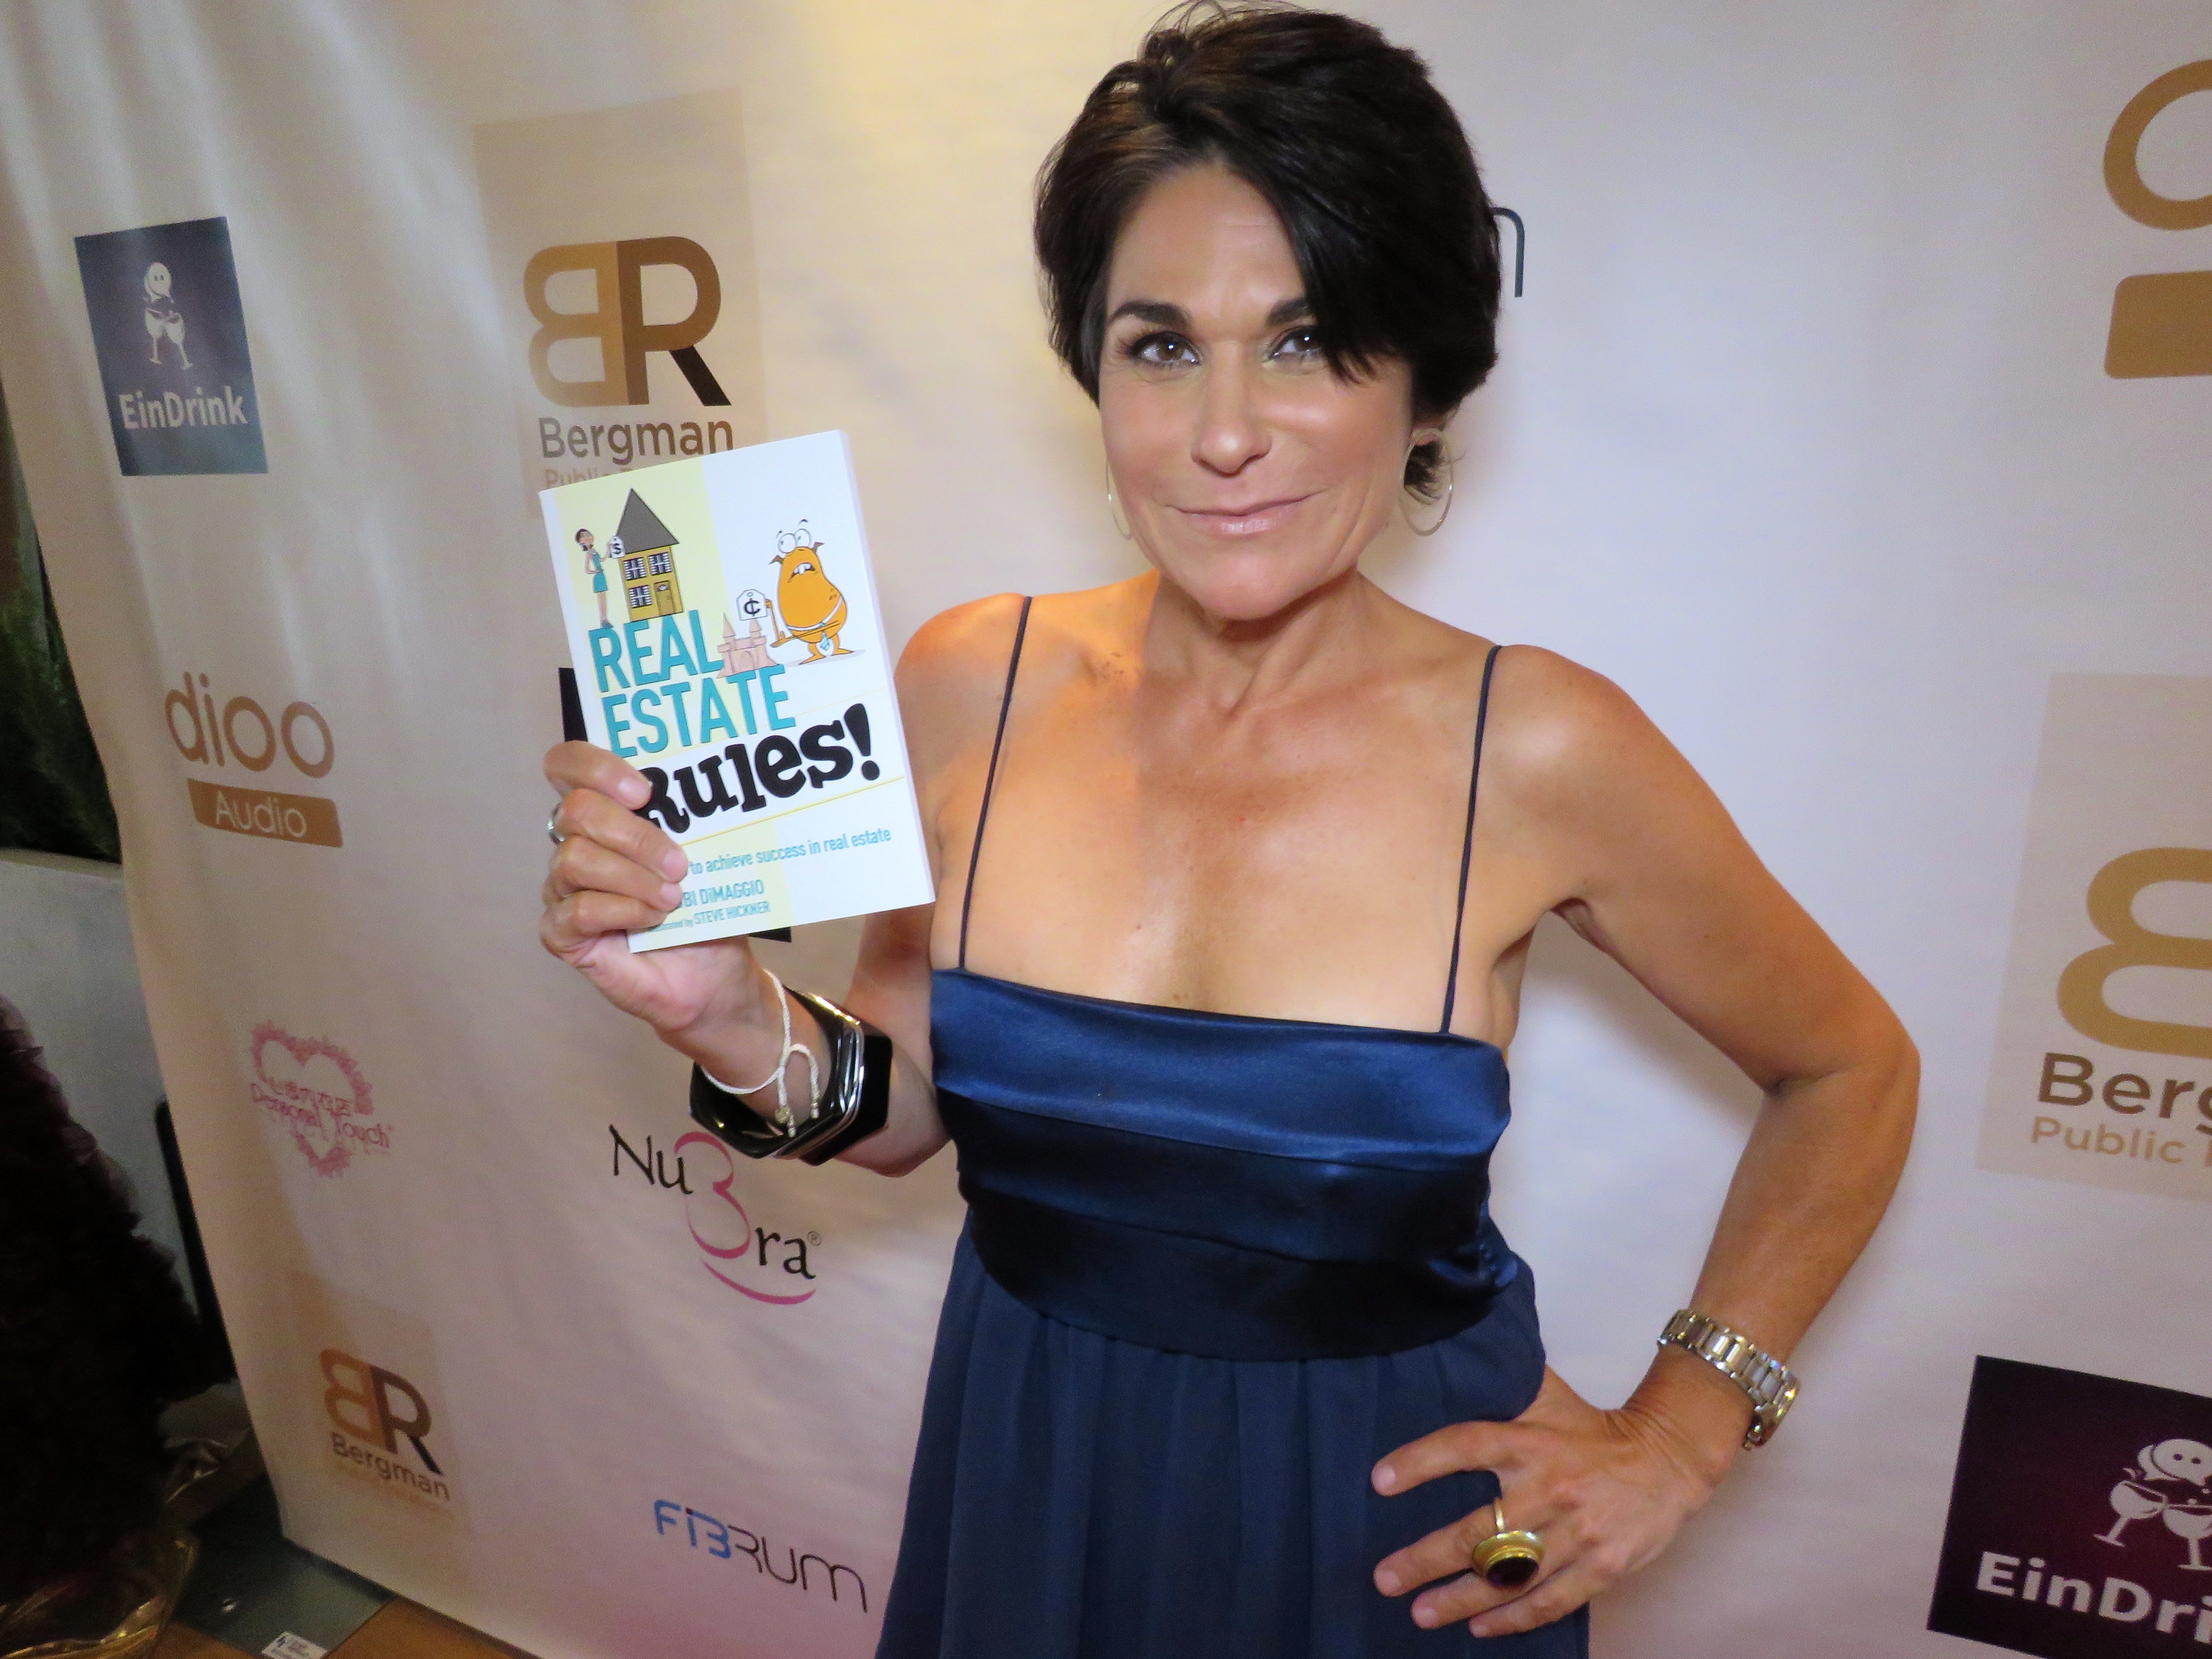 Author Debbi DiMaggio with her latest book, Real Estate Rules!